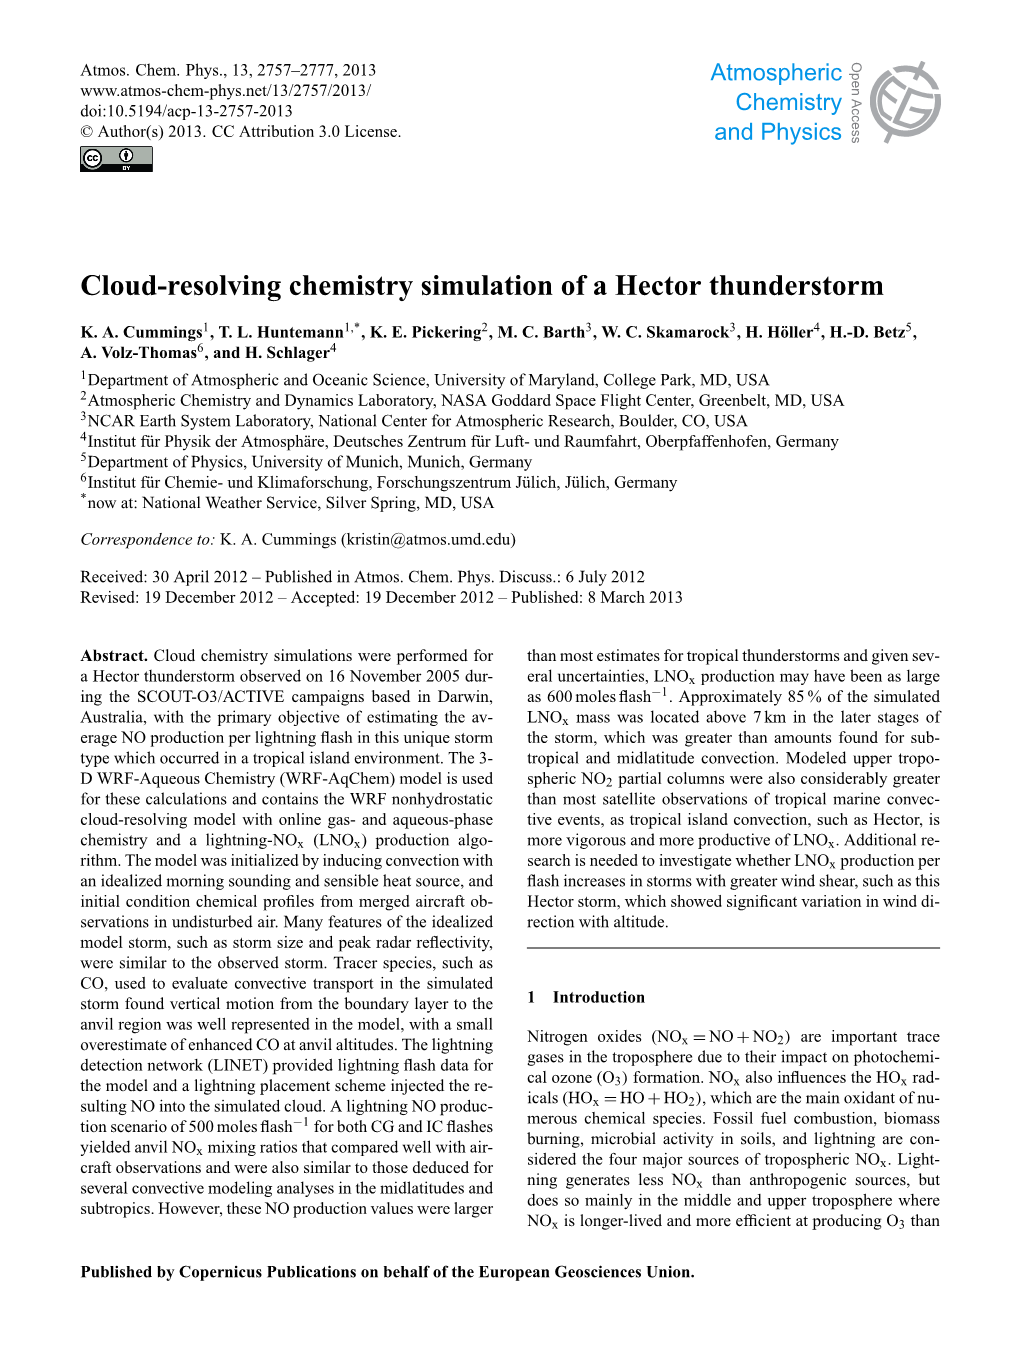 Cloud-Resolving Chemistry Simulation of a Hector Thunderstorm Open Access